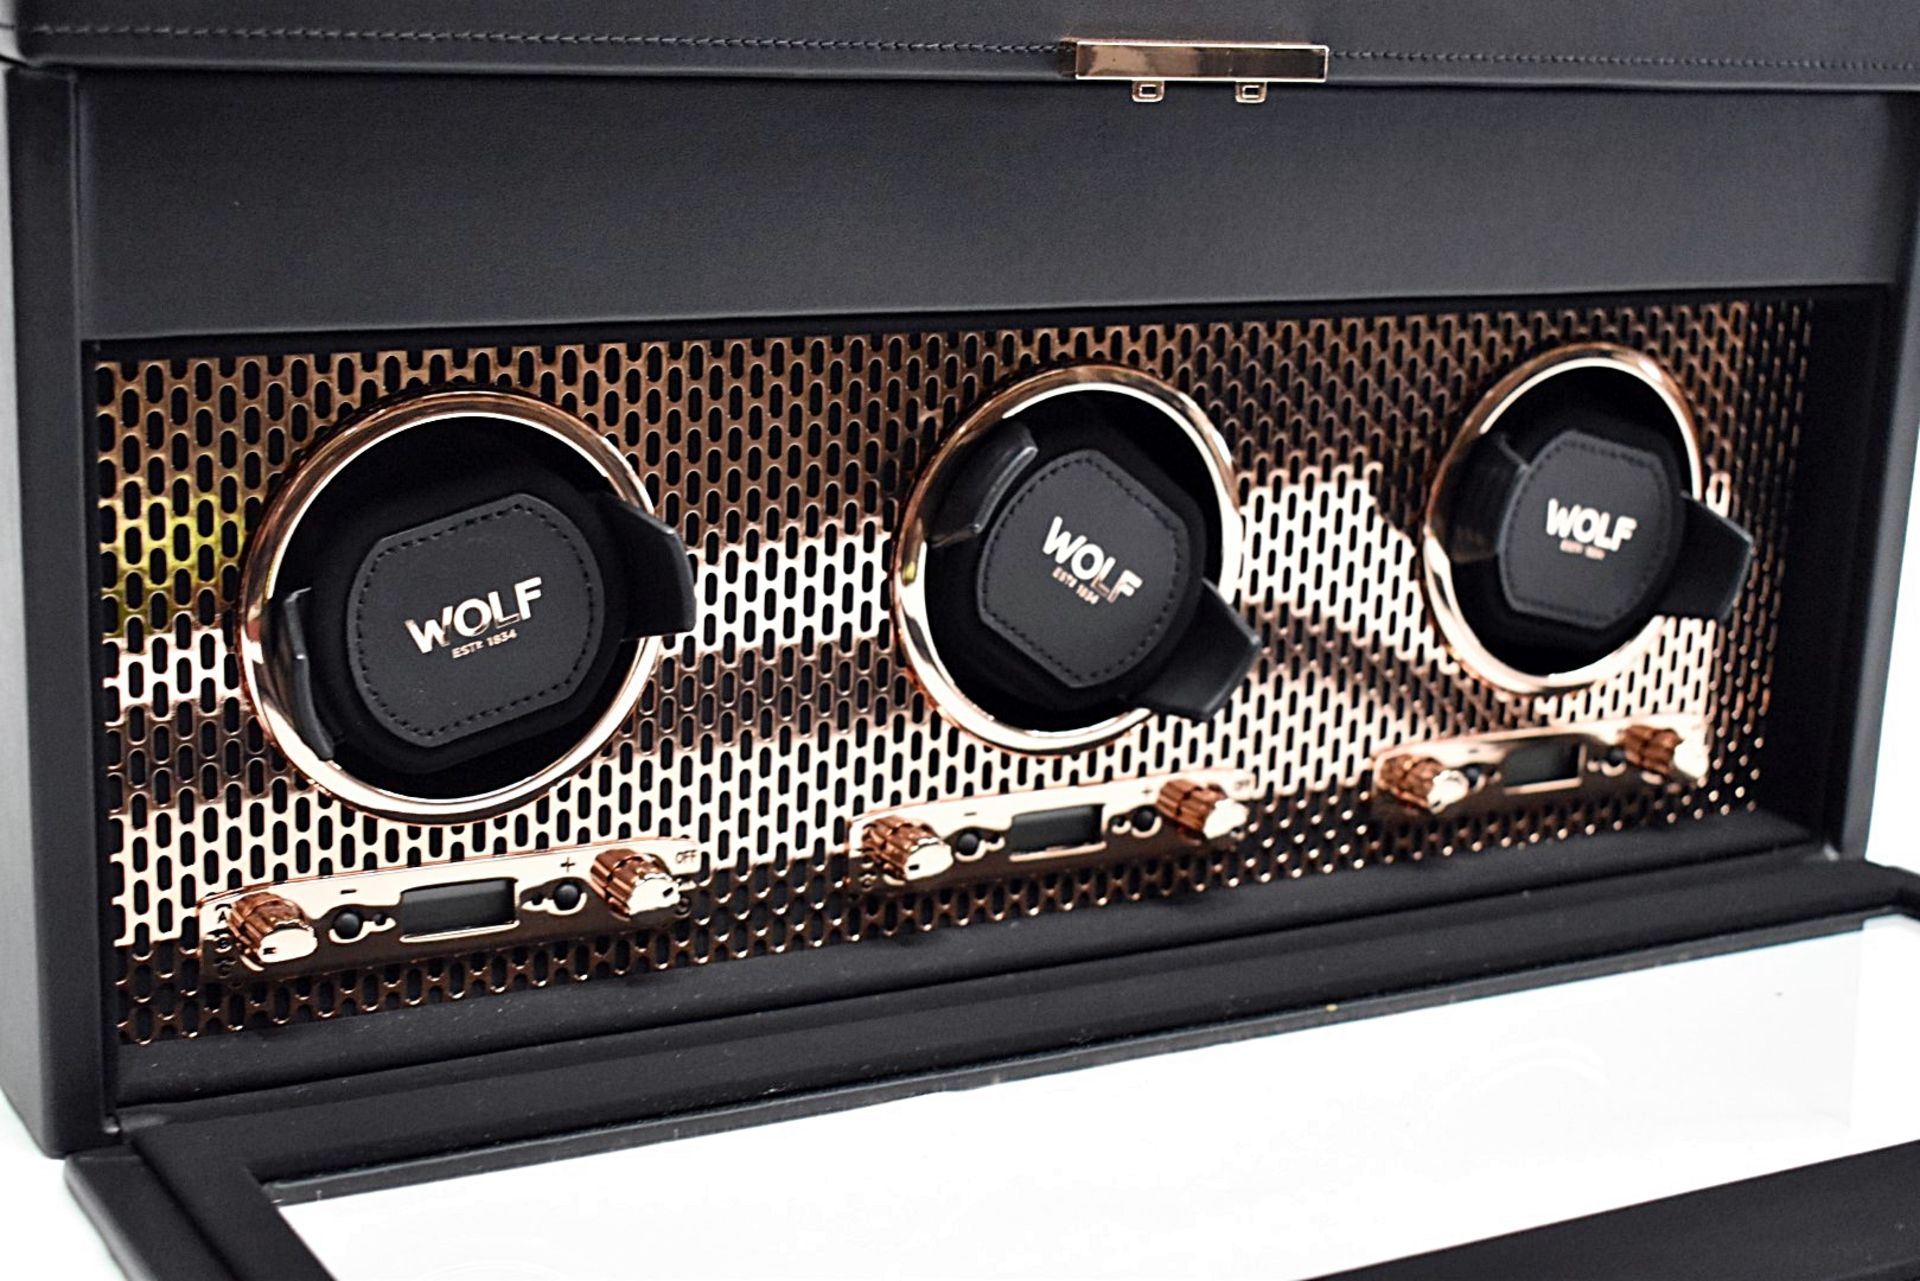 1 x WOLF 'Axis' Luxury Triple Watch Winder With Storage - Original Price £1,809 - Unused Boxed Stock - Image 2 of 32